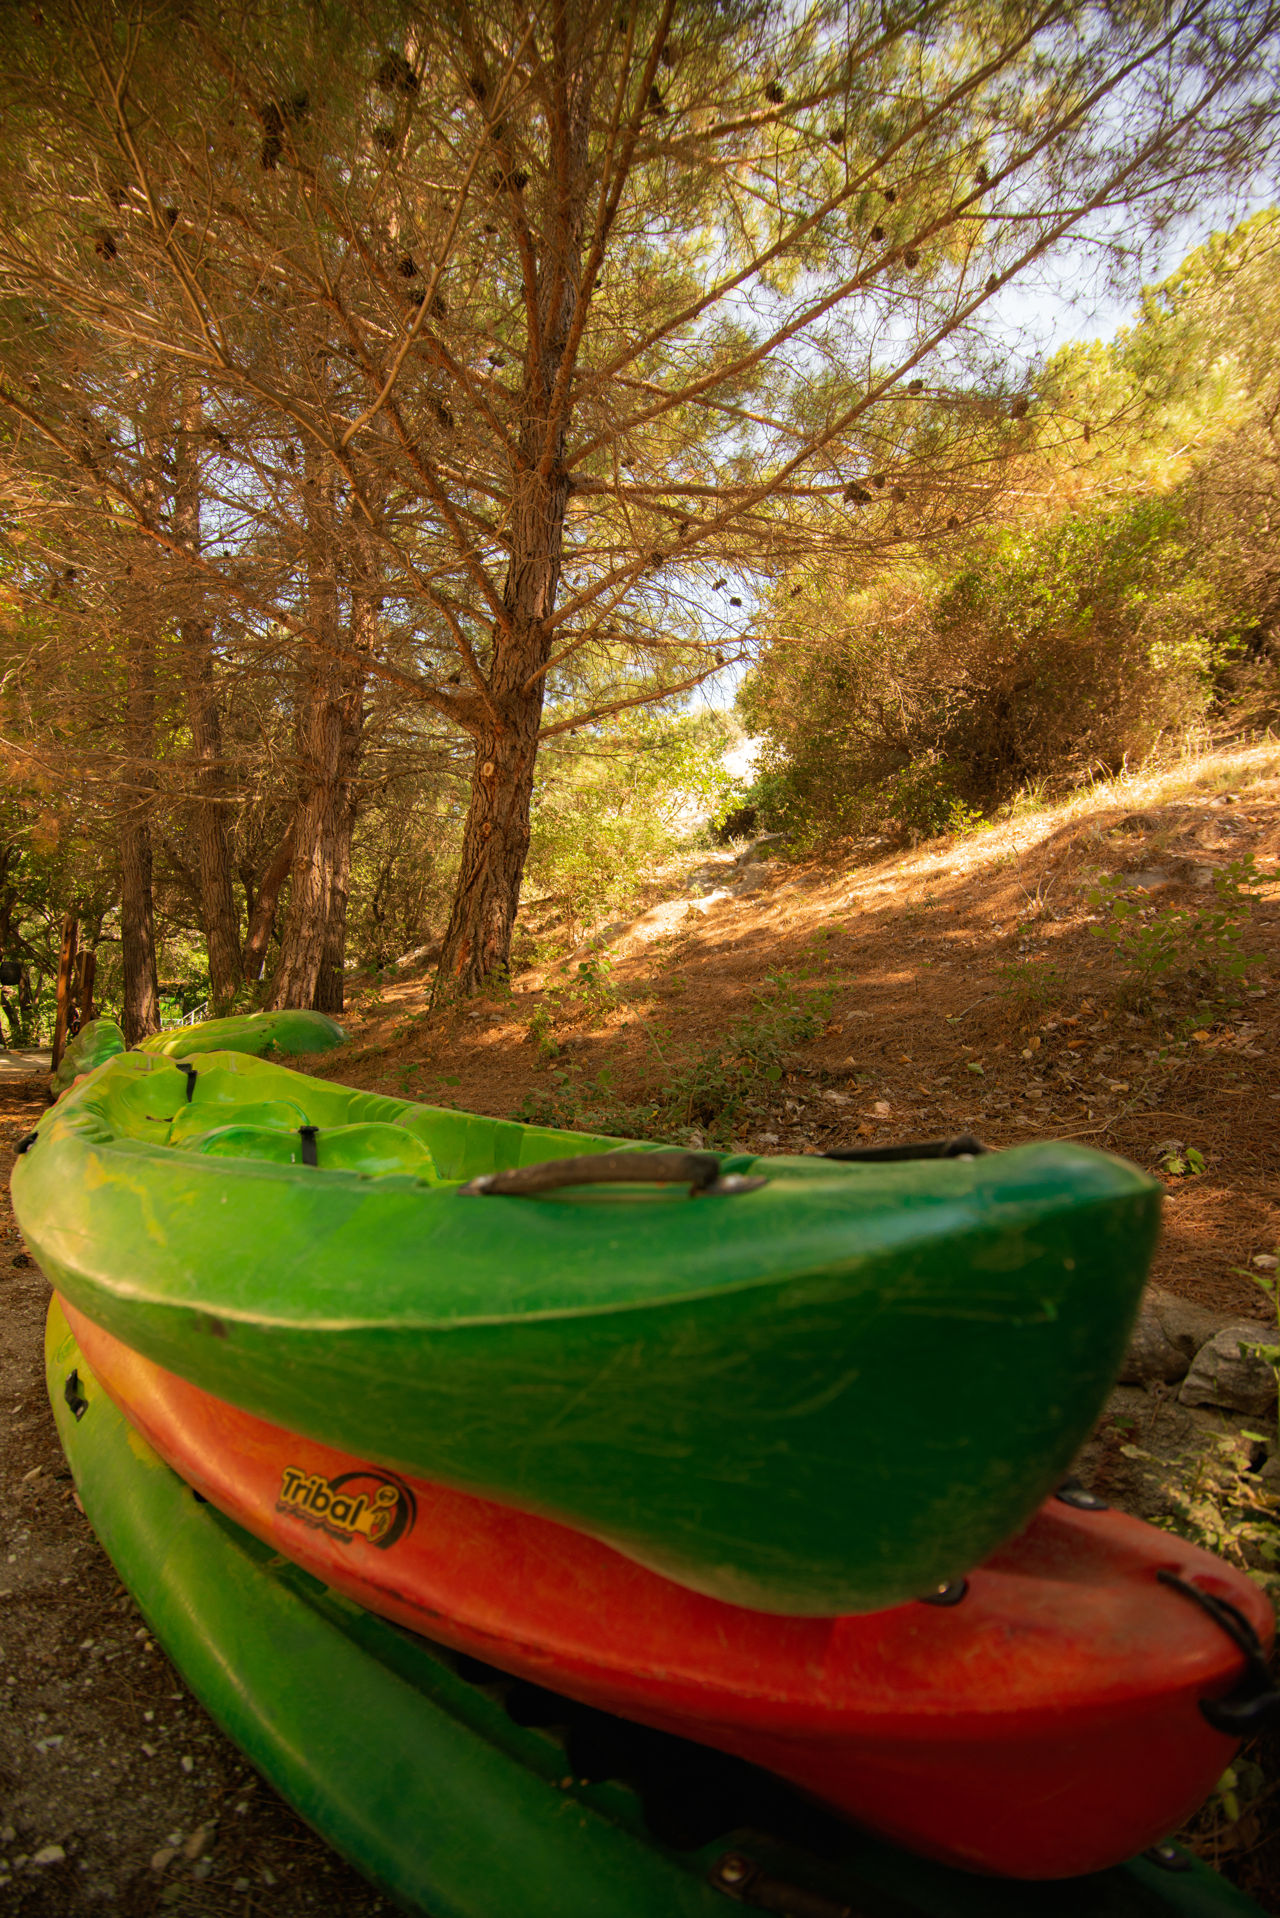 Organised excursions on the Nestos River take place all year round